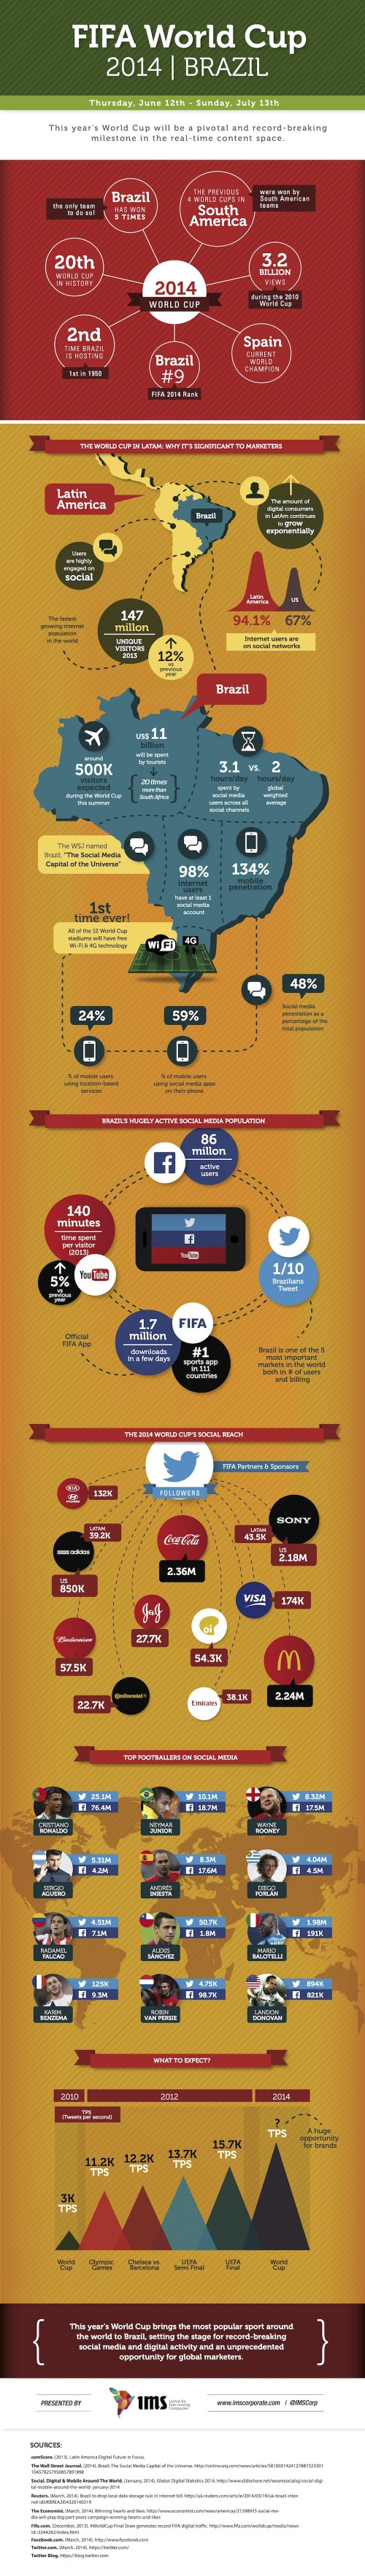 Infographic: The Brazil 2014 World Cup is Super Social. Story on ViralBlog.com